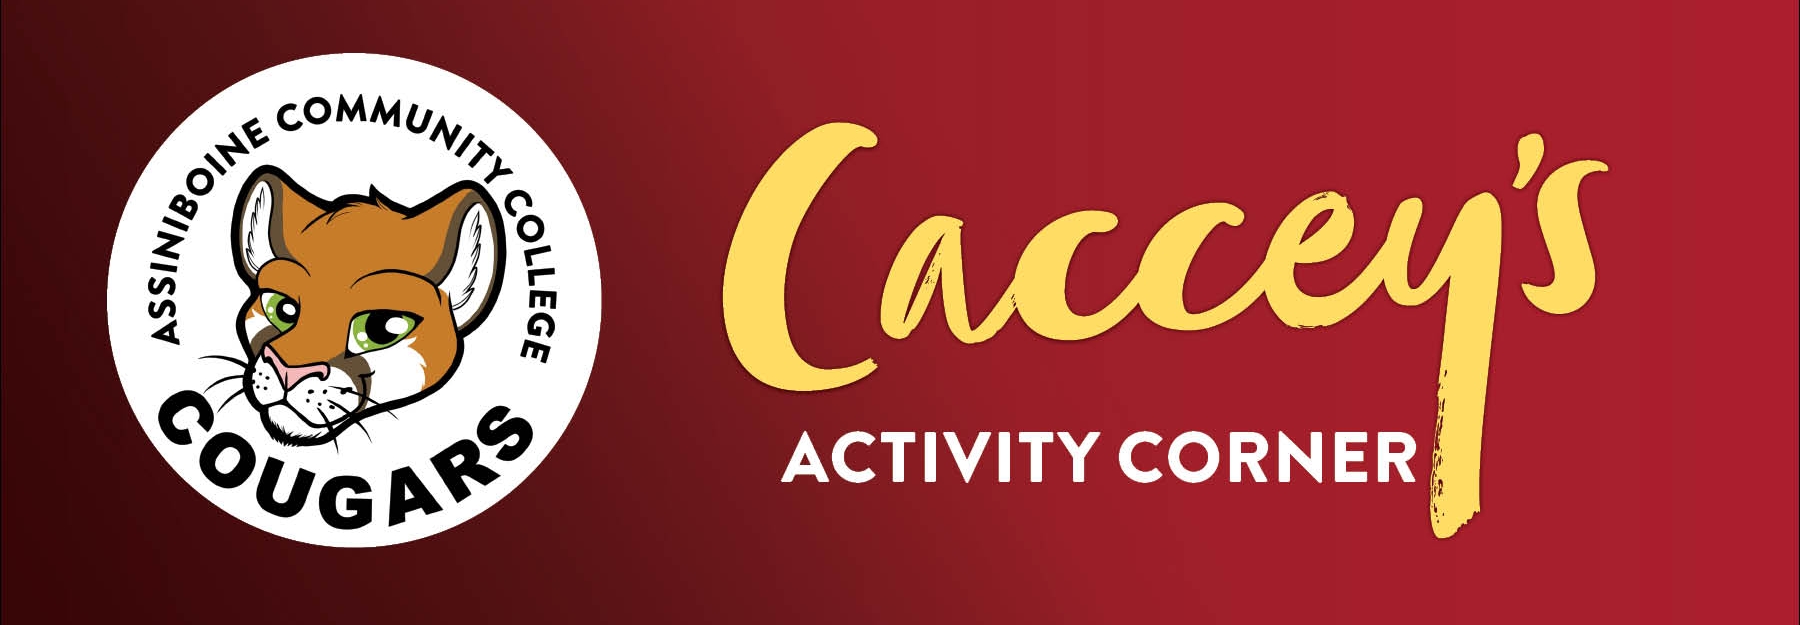 Caccey's Activity Corner banner.